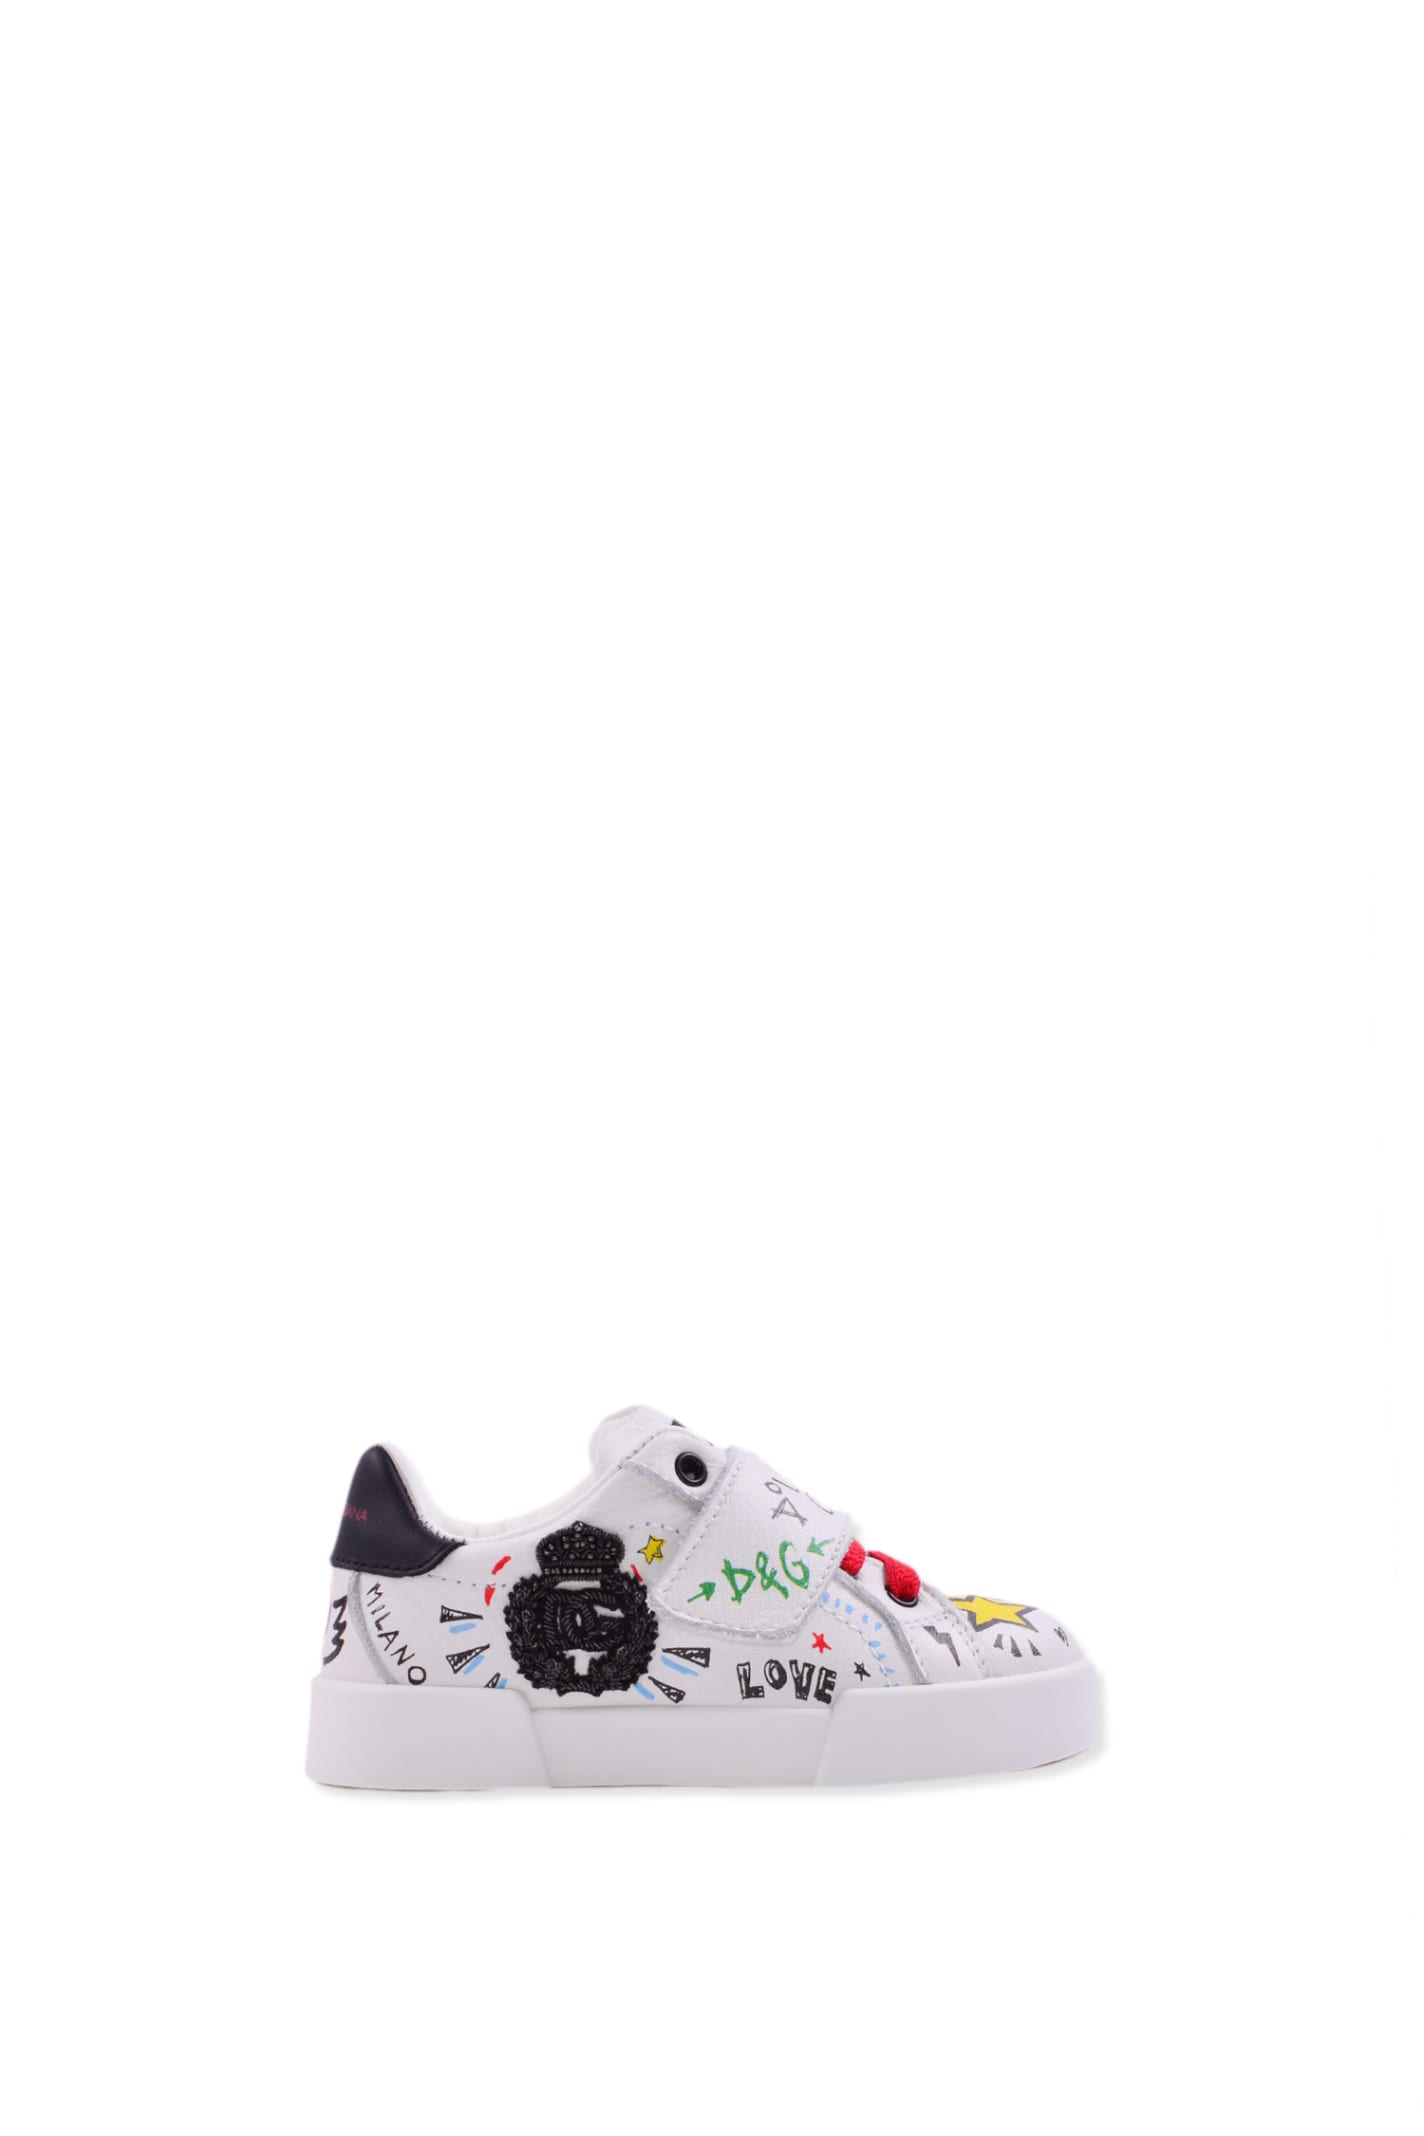 Dolce & Gabbana Leather Sneakers With Print